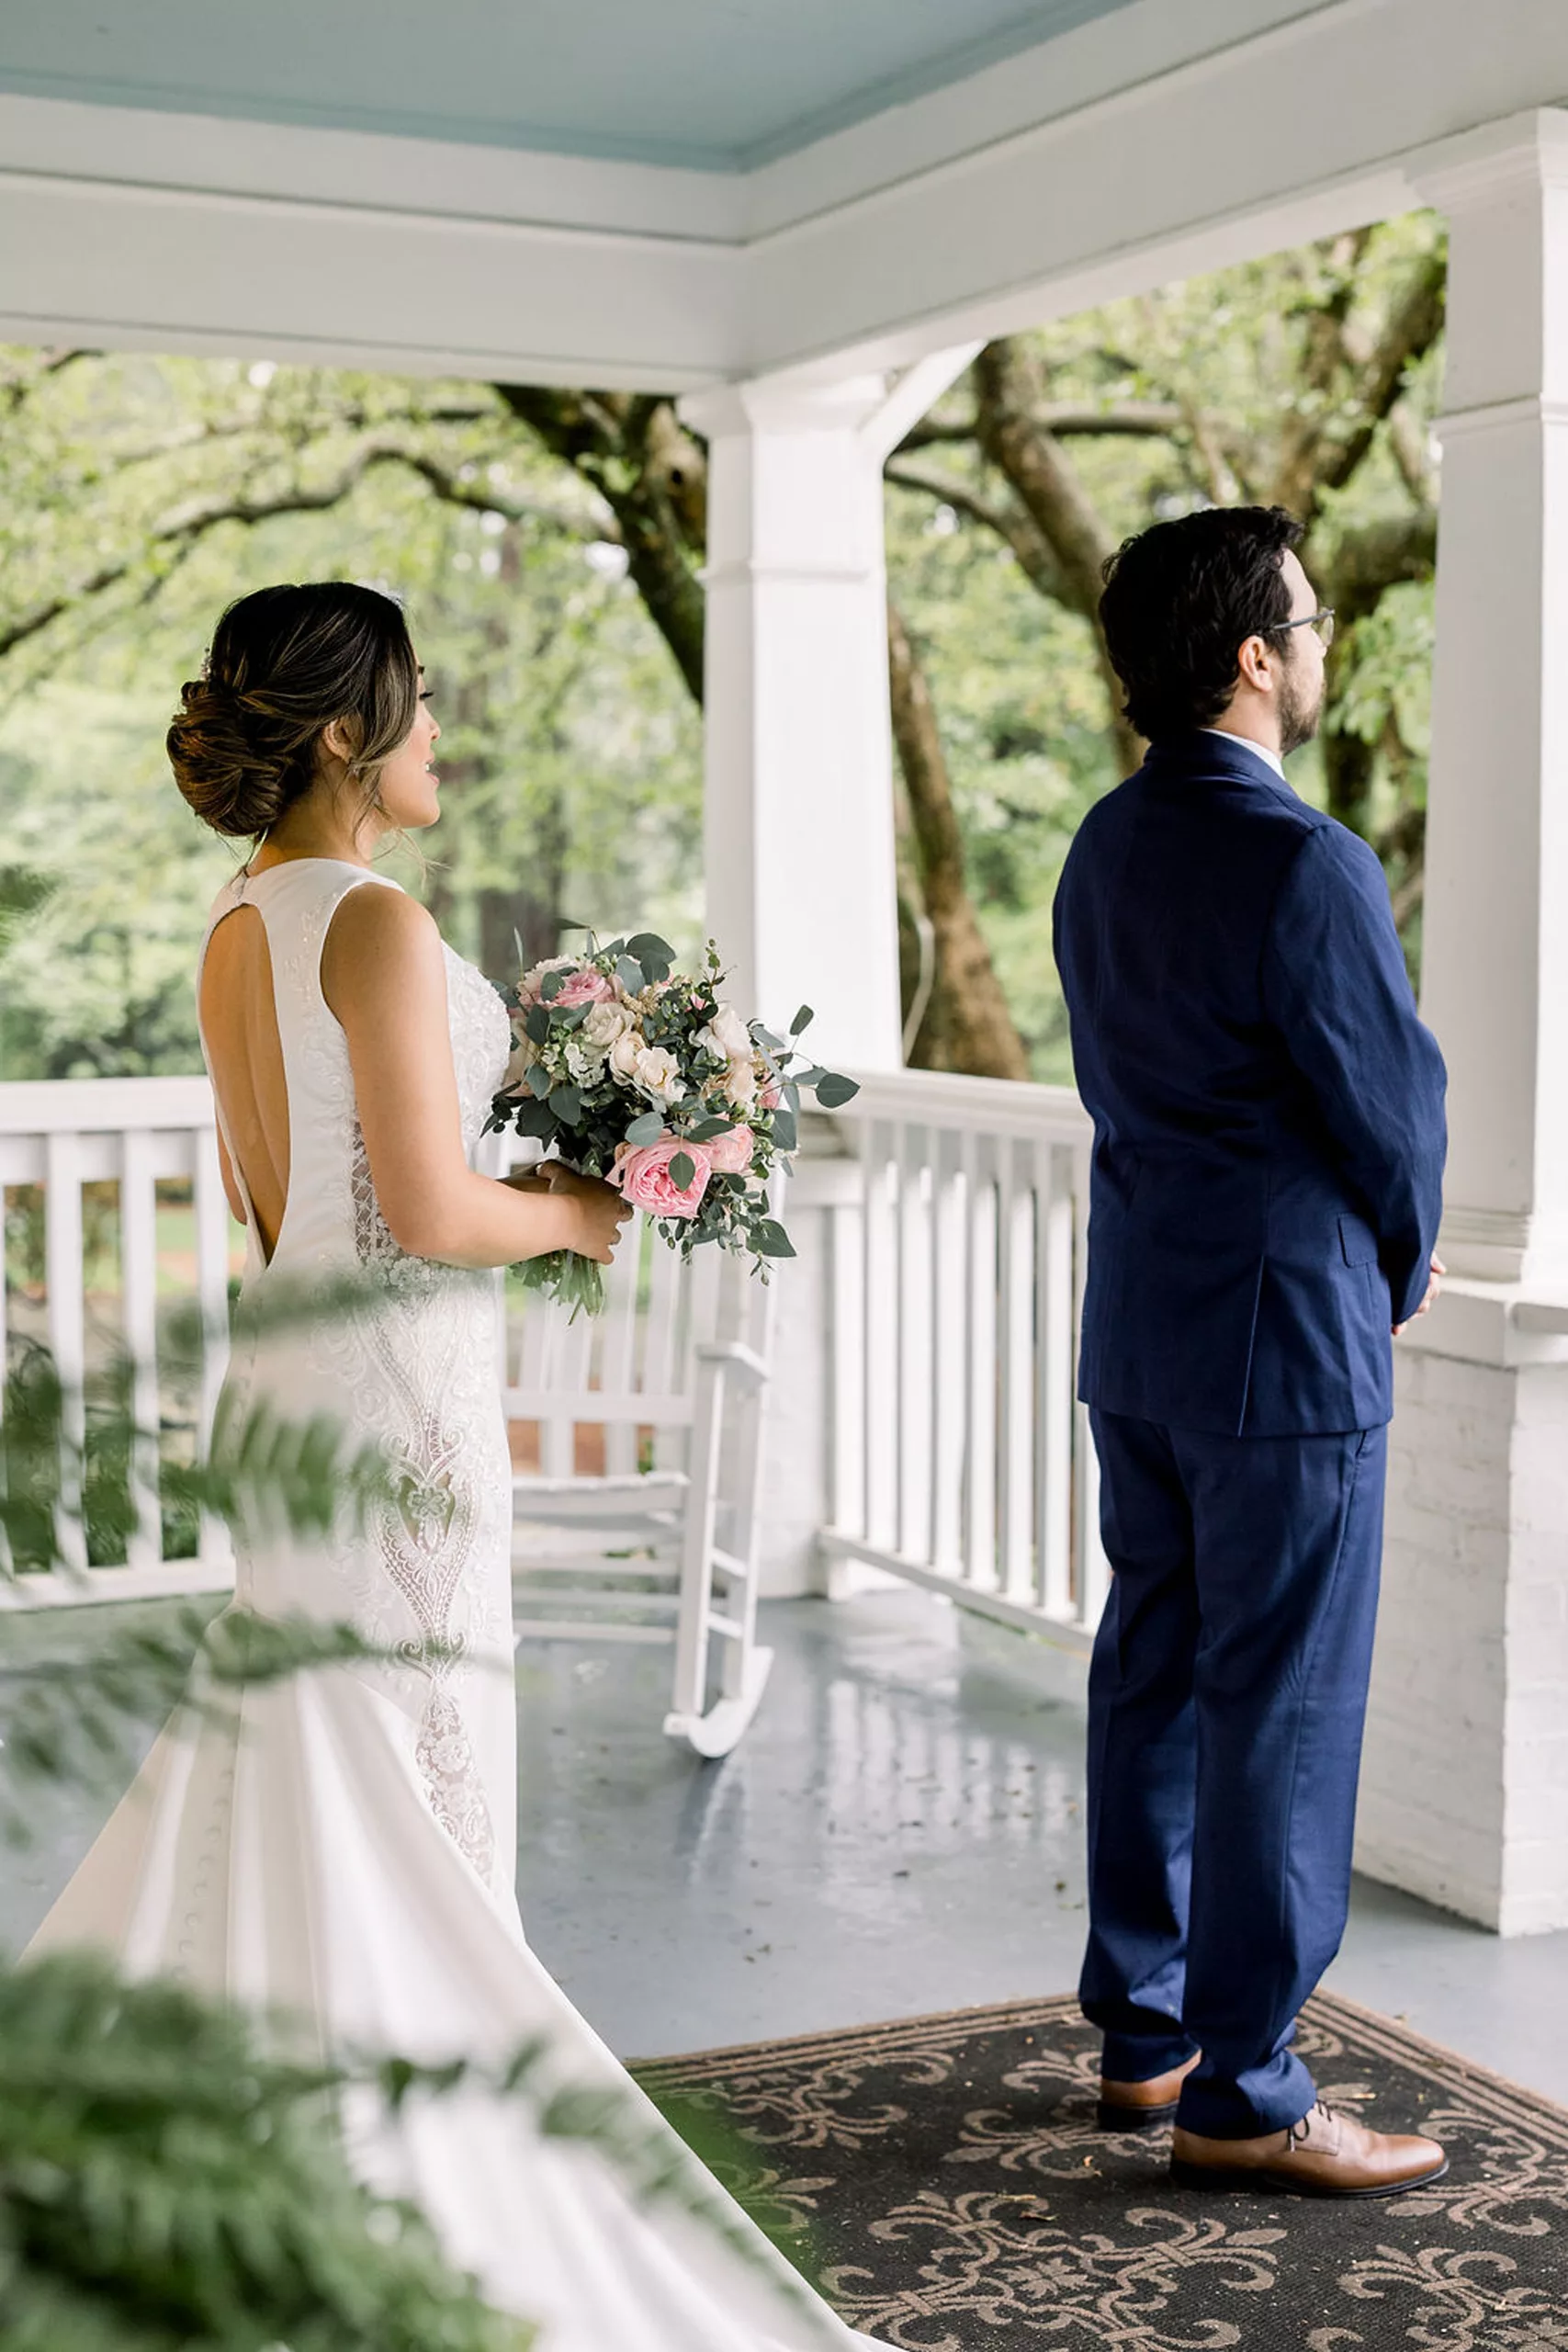 A groom stands facing away from his bride as she approaches for a first look on a porch